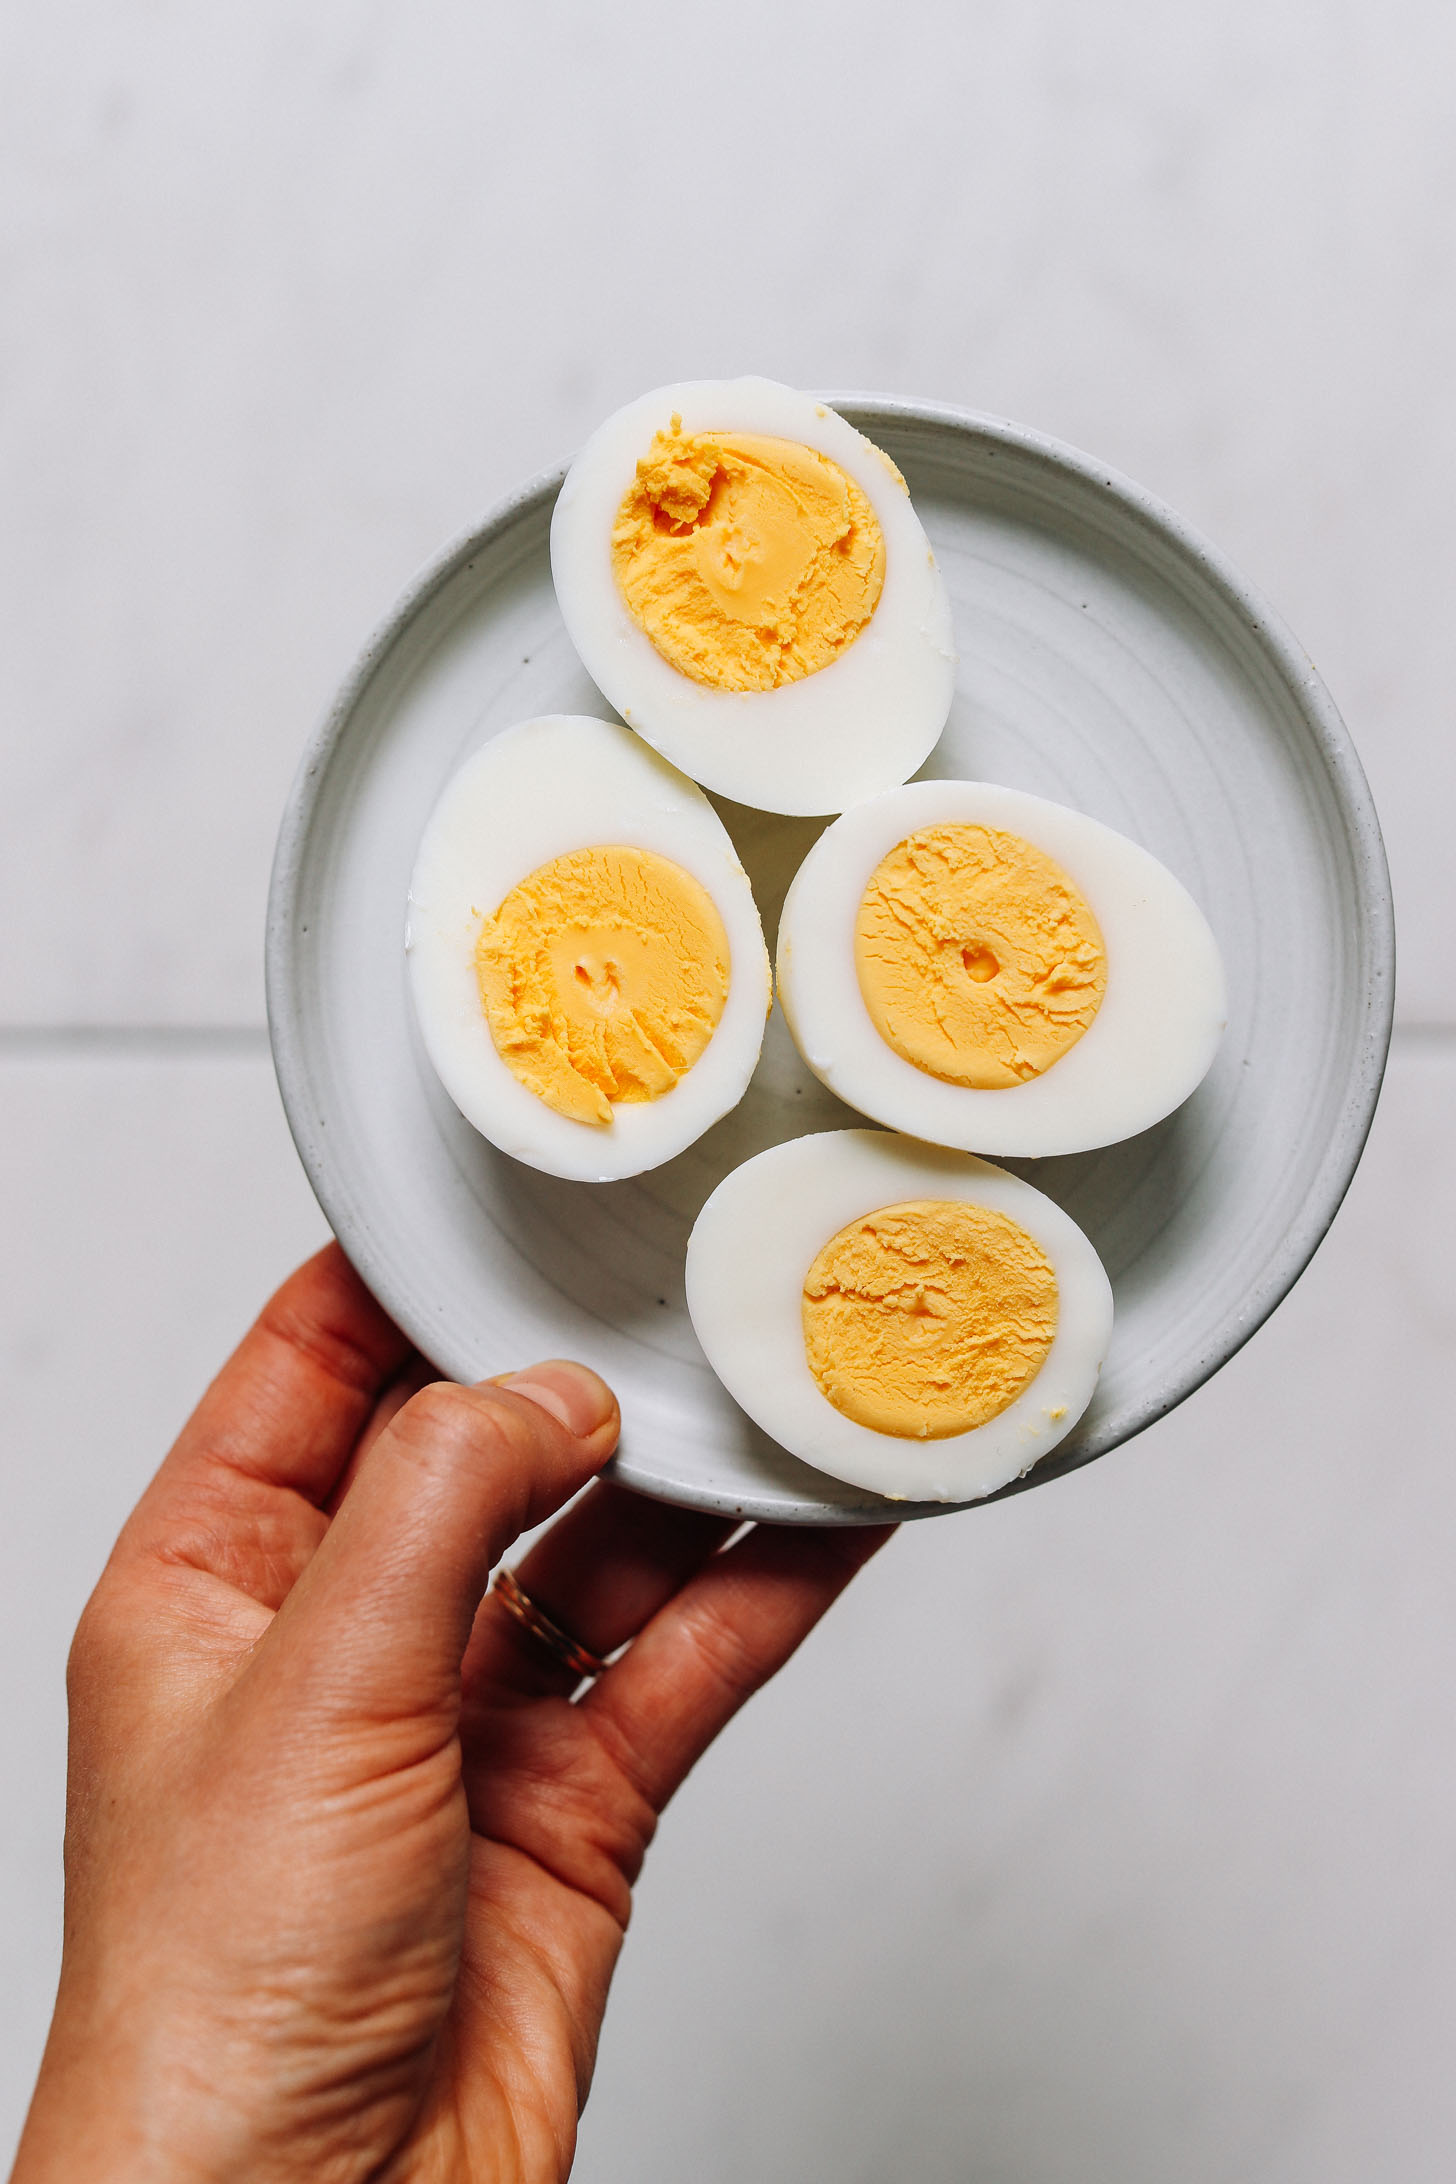 How to Hard Boil Eggs: The Ultimate Guide for Perfectly Boiled Eggs Every Time